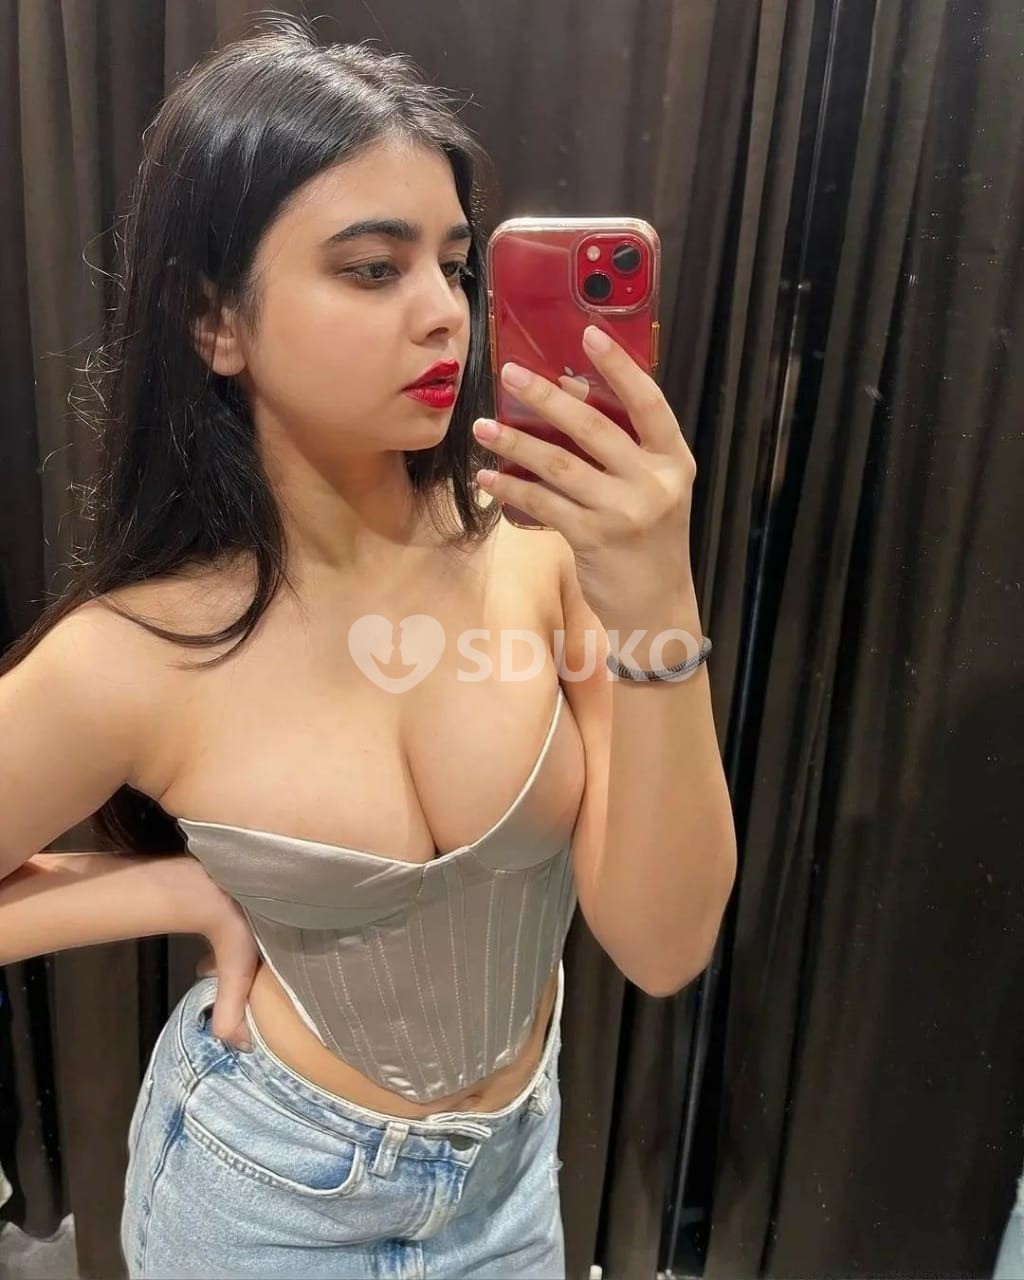 JAIPUR VIP TODAY LOW PRICE 🛣️;ESCORT 🥰SERVICE 100% SAFE AND SECURE ANYTIME CALL ME 24 X 7 SERVICE AVAILABLE 100%